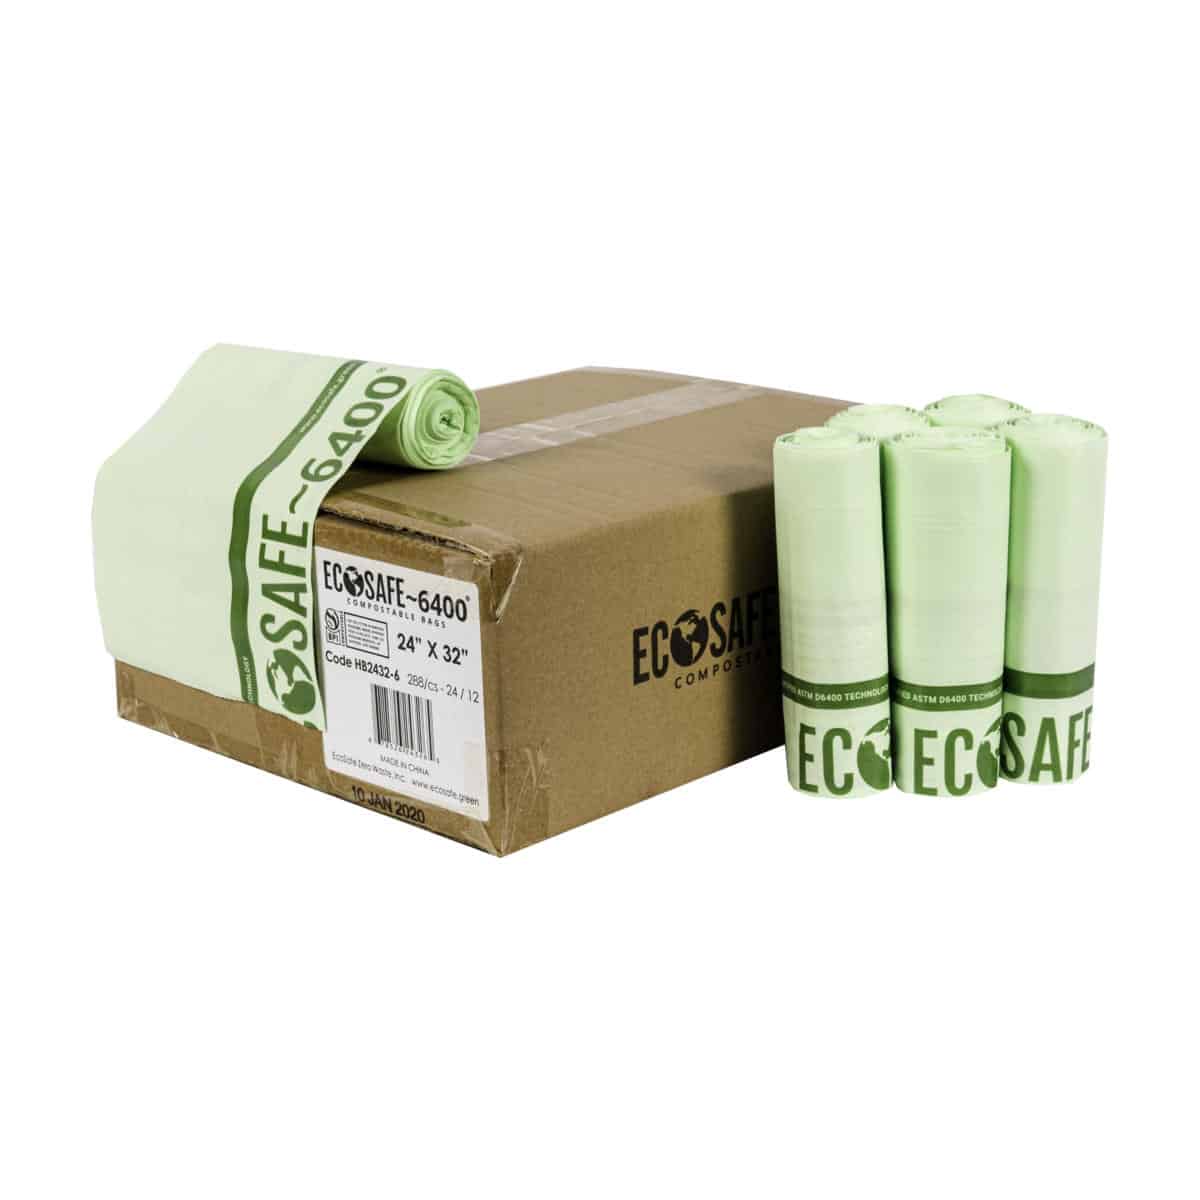 EcoSafe 24x32 Compostable Bags/Liners